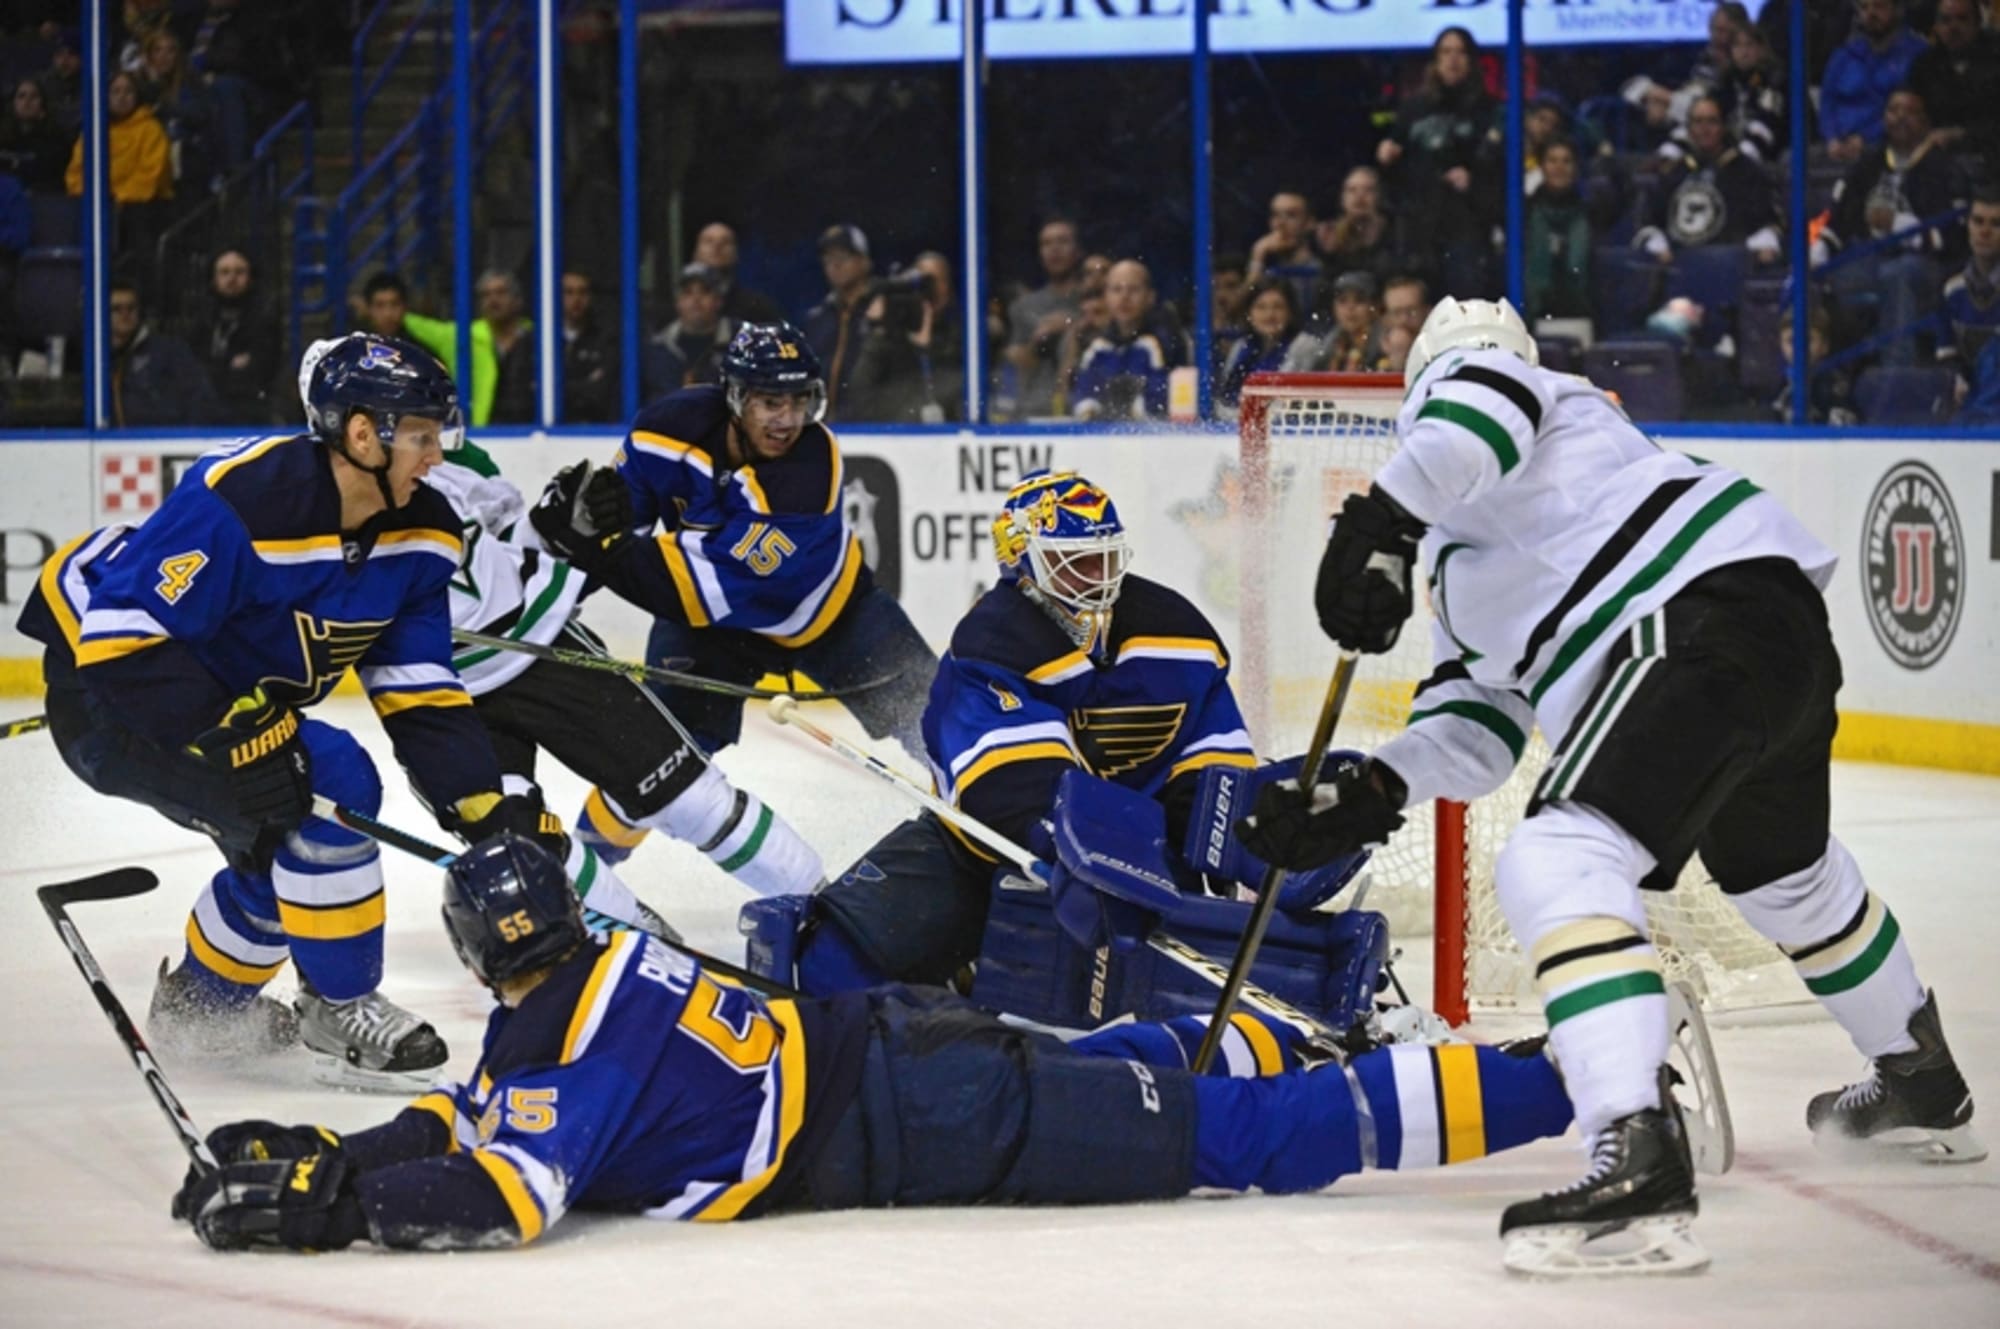 St. Louis Blues: Weekly Division Review (3rd Week of February)